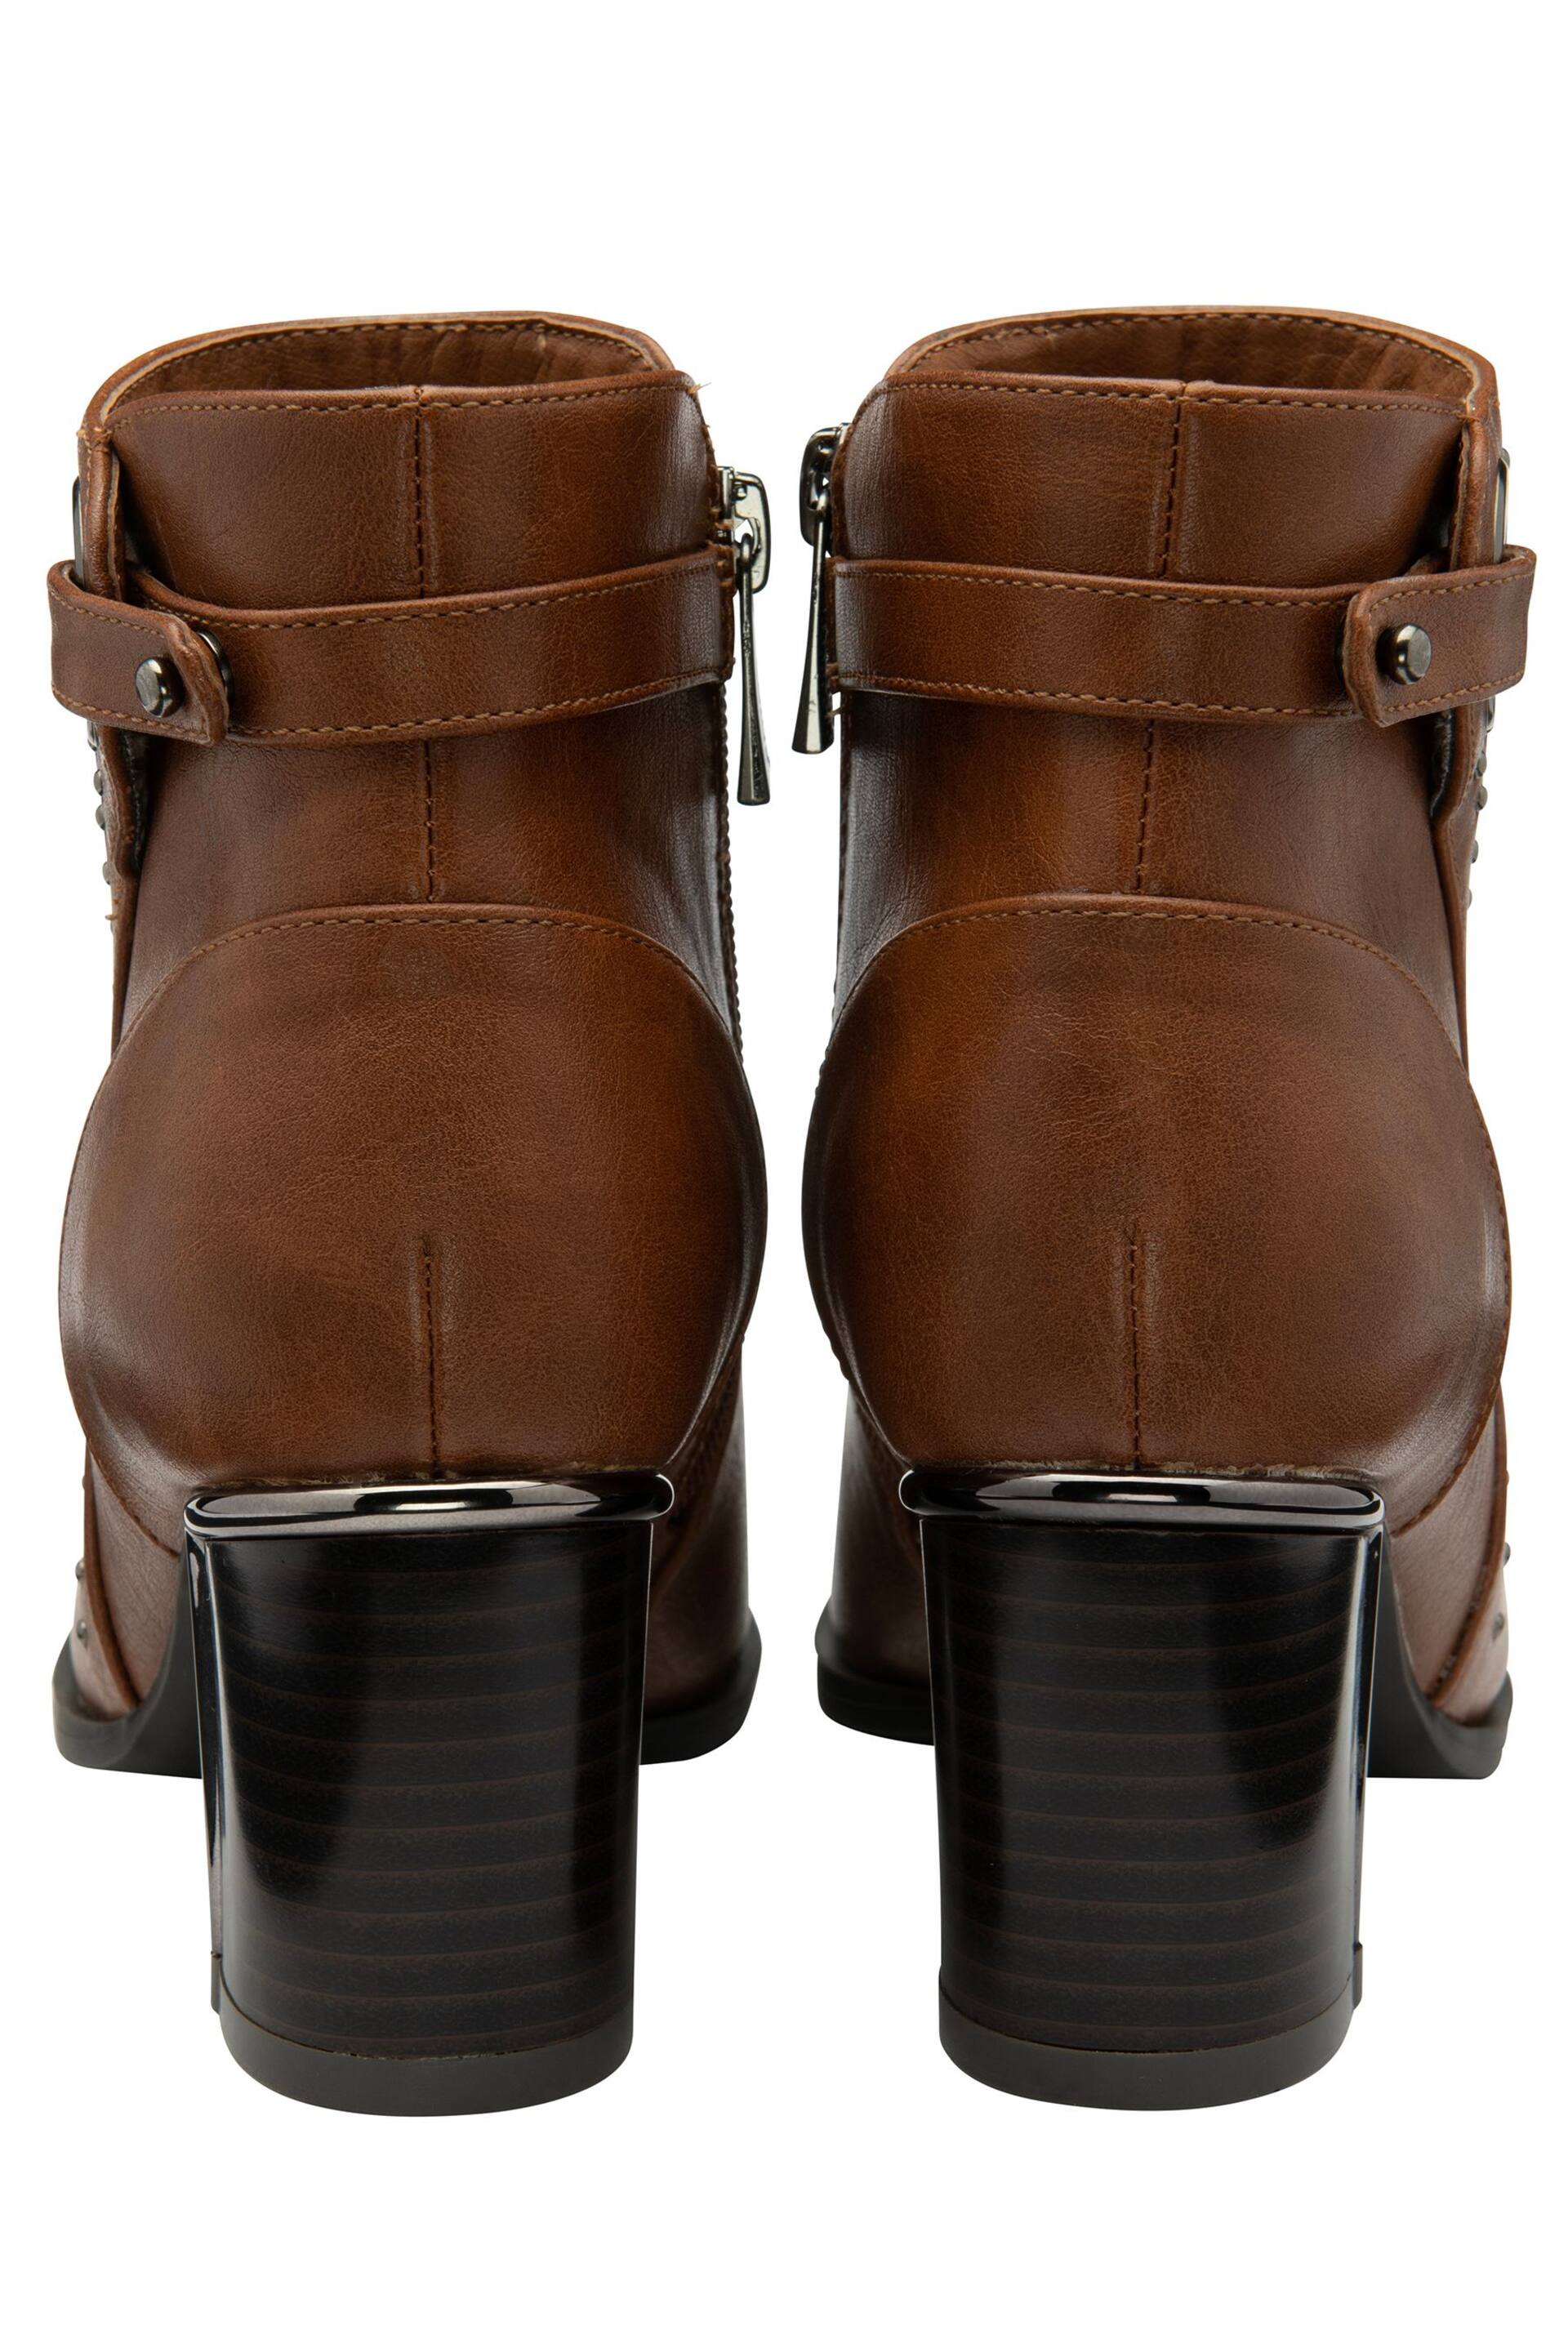 Lotus Brown Ankle Boots - Image 3 of 4